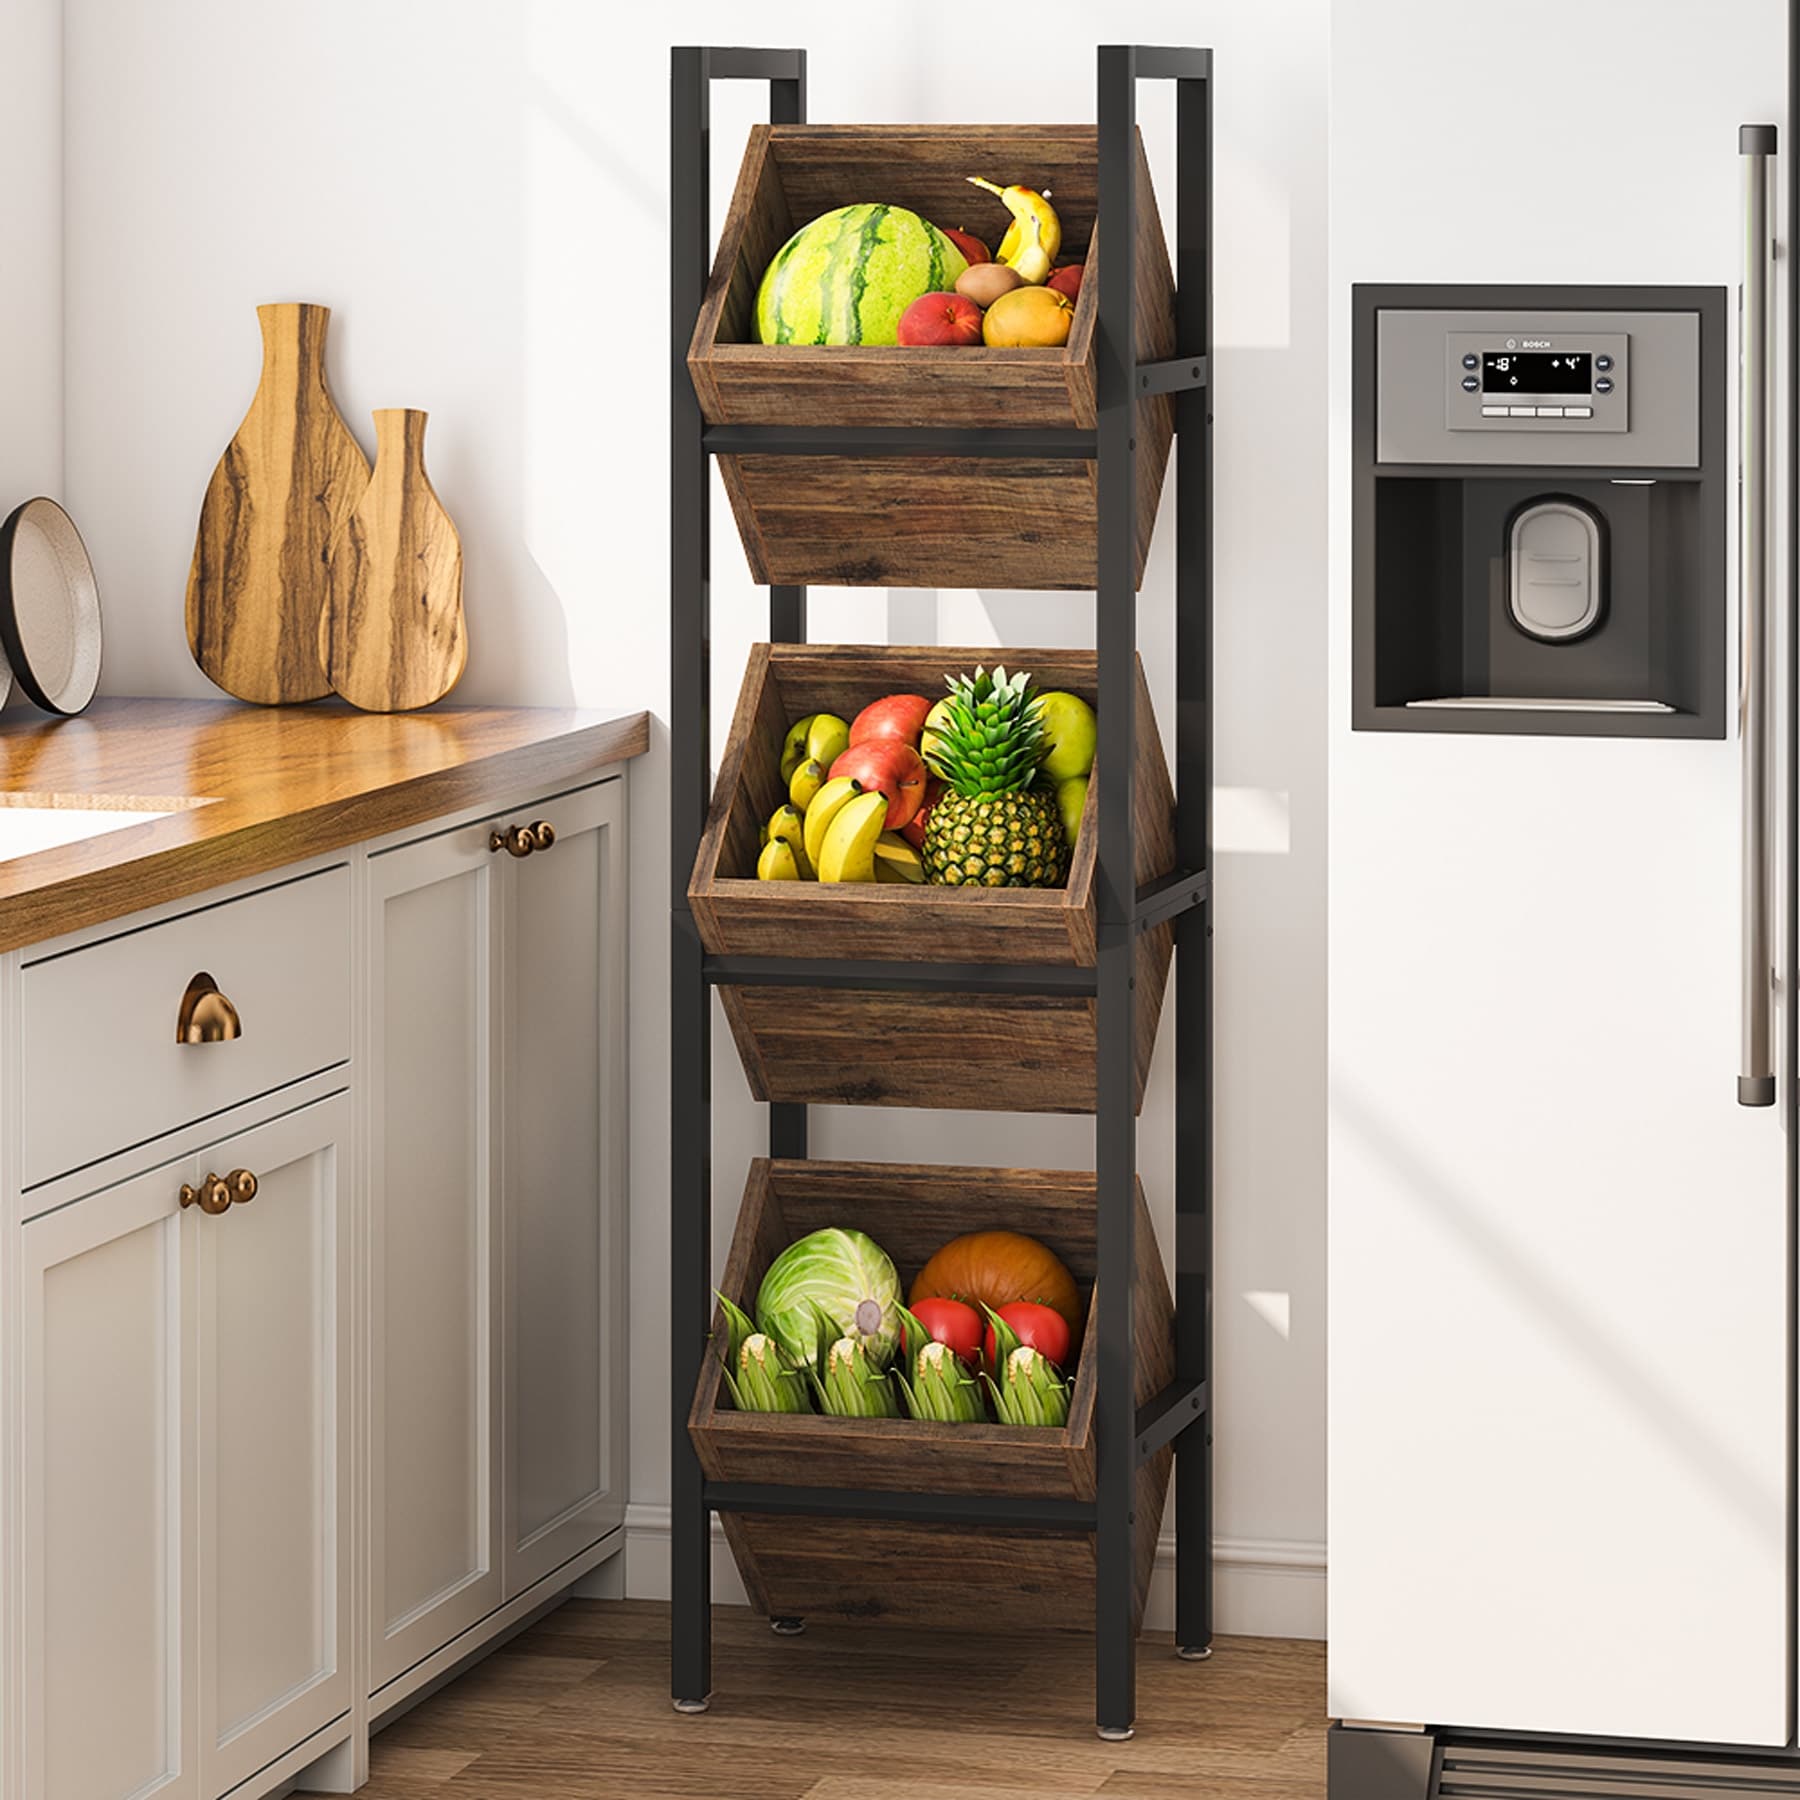 https://ak1.ostkcdn.com/images/products/is/images/direct/3b2785ace2388bdb6da38286d203771079e33057/Rustic-Vertical-Standing-Basket-Storage-Tower-for-Kitchen-Bathroom-Living-Room.jpg